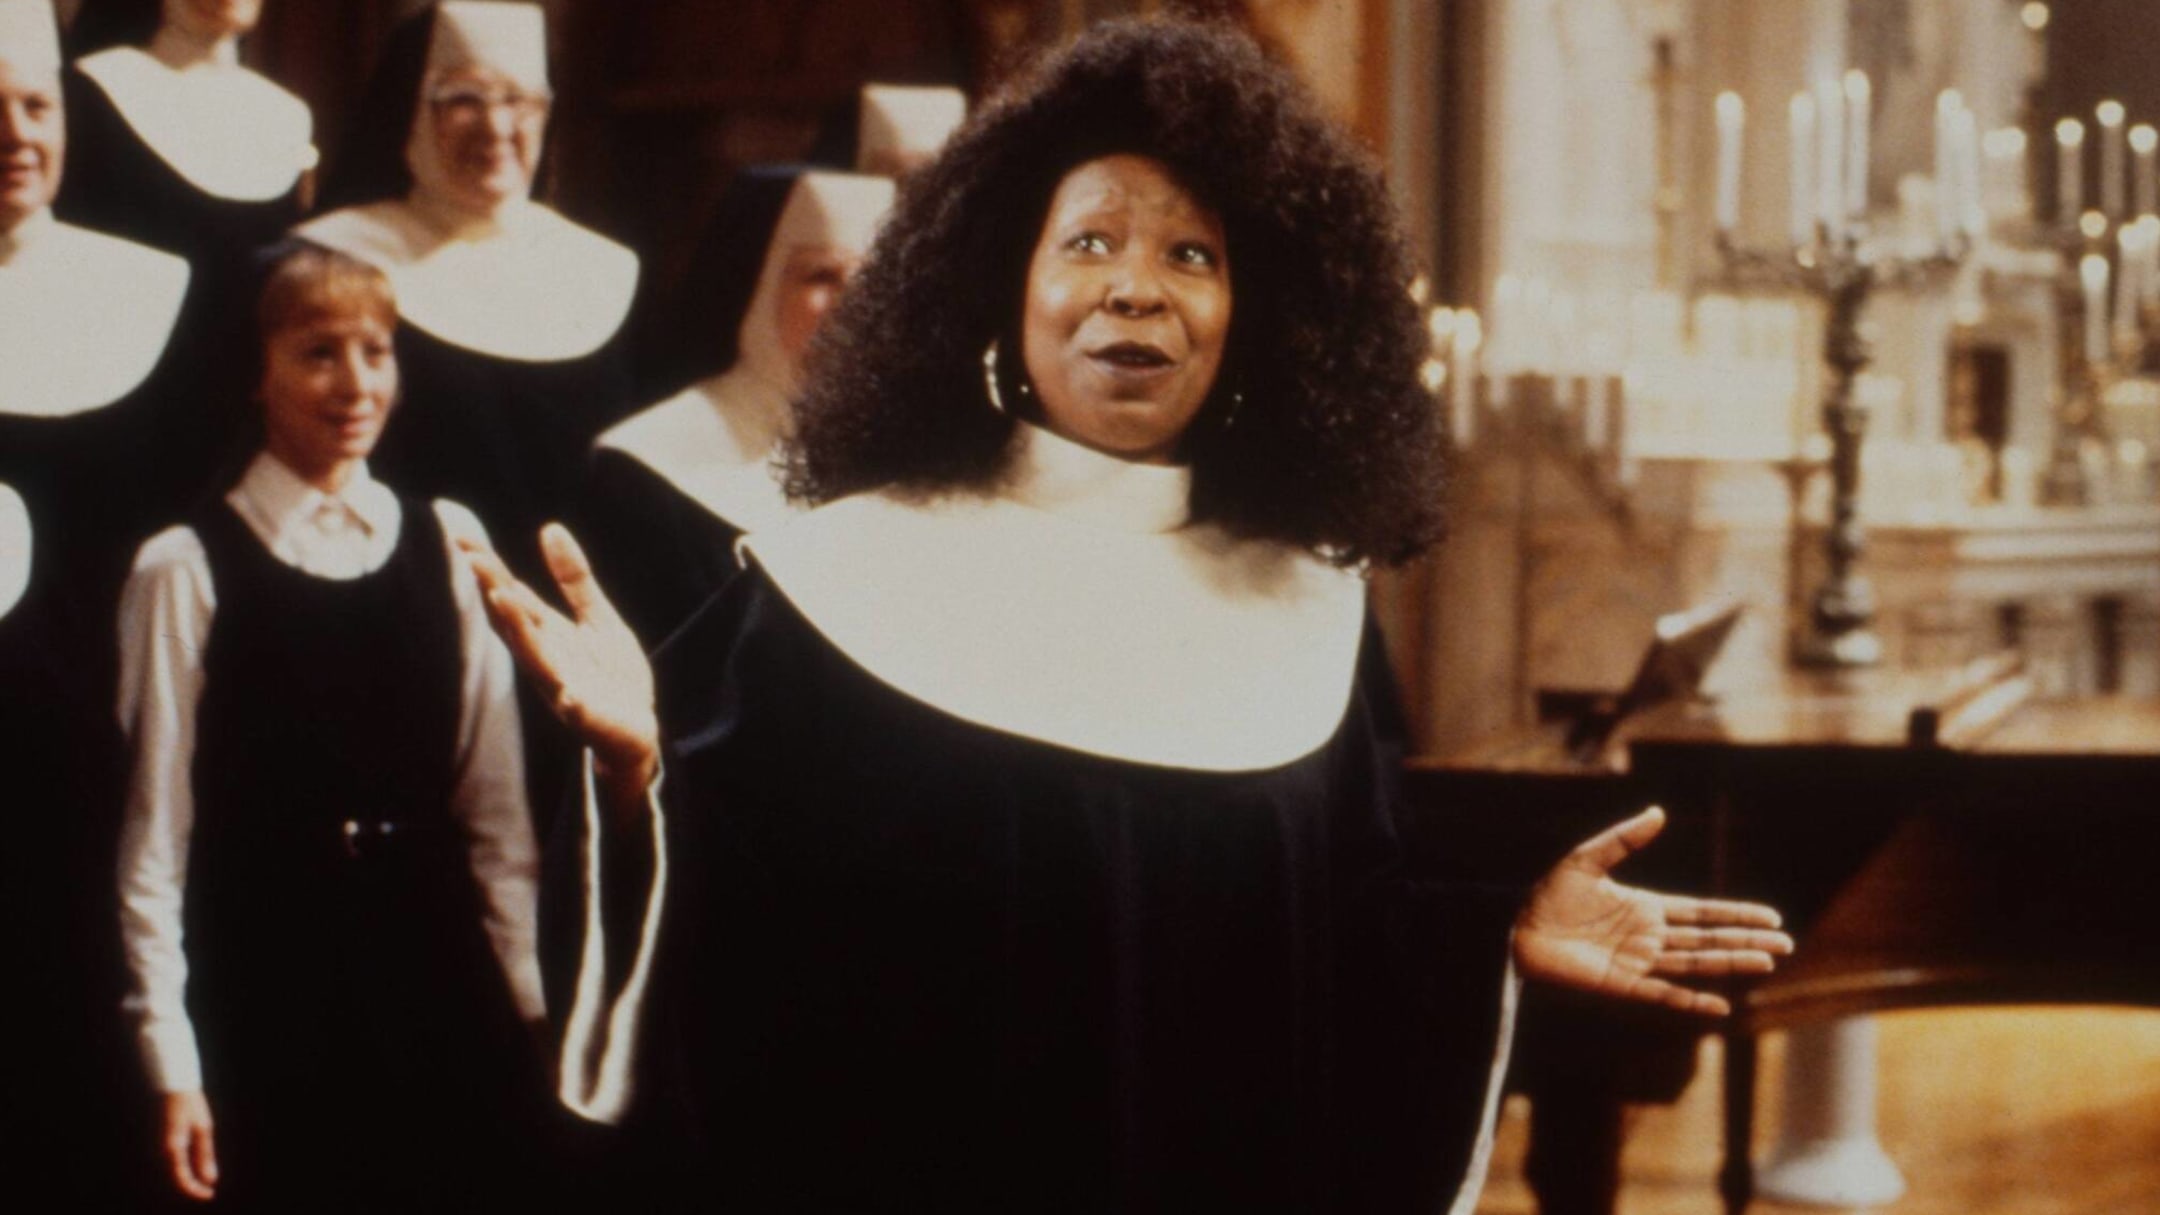 San Diego Broadway Shows: Everything To Know About “Sister Act”